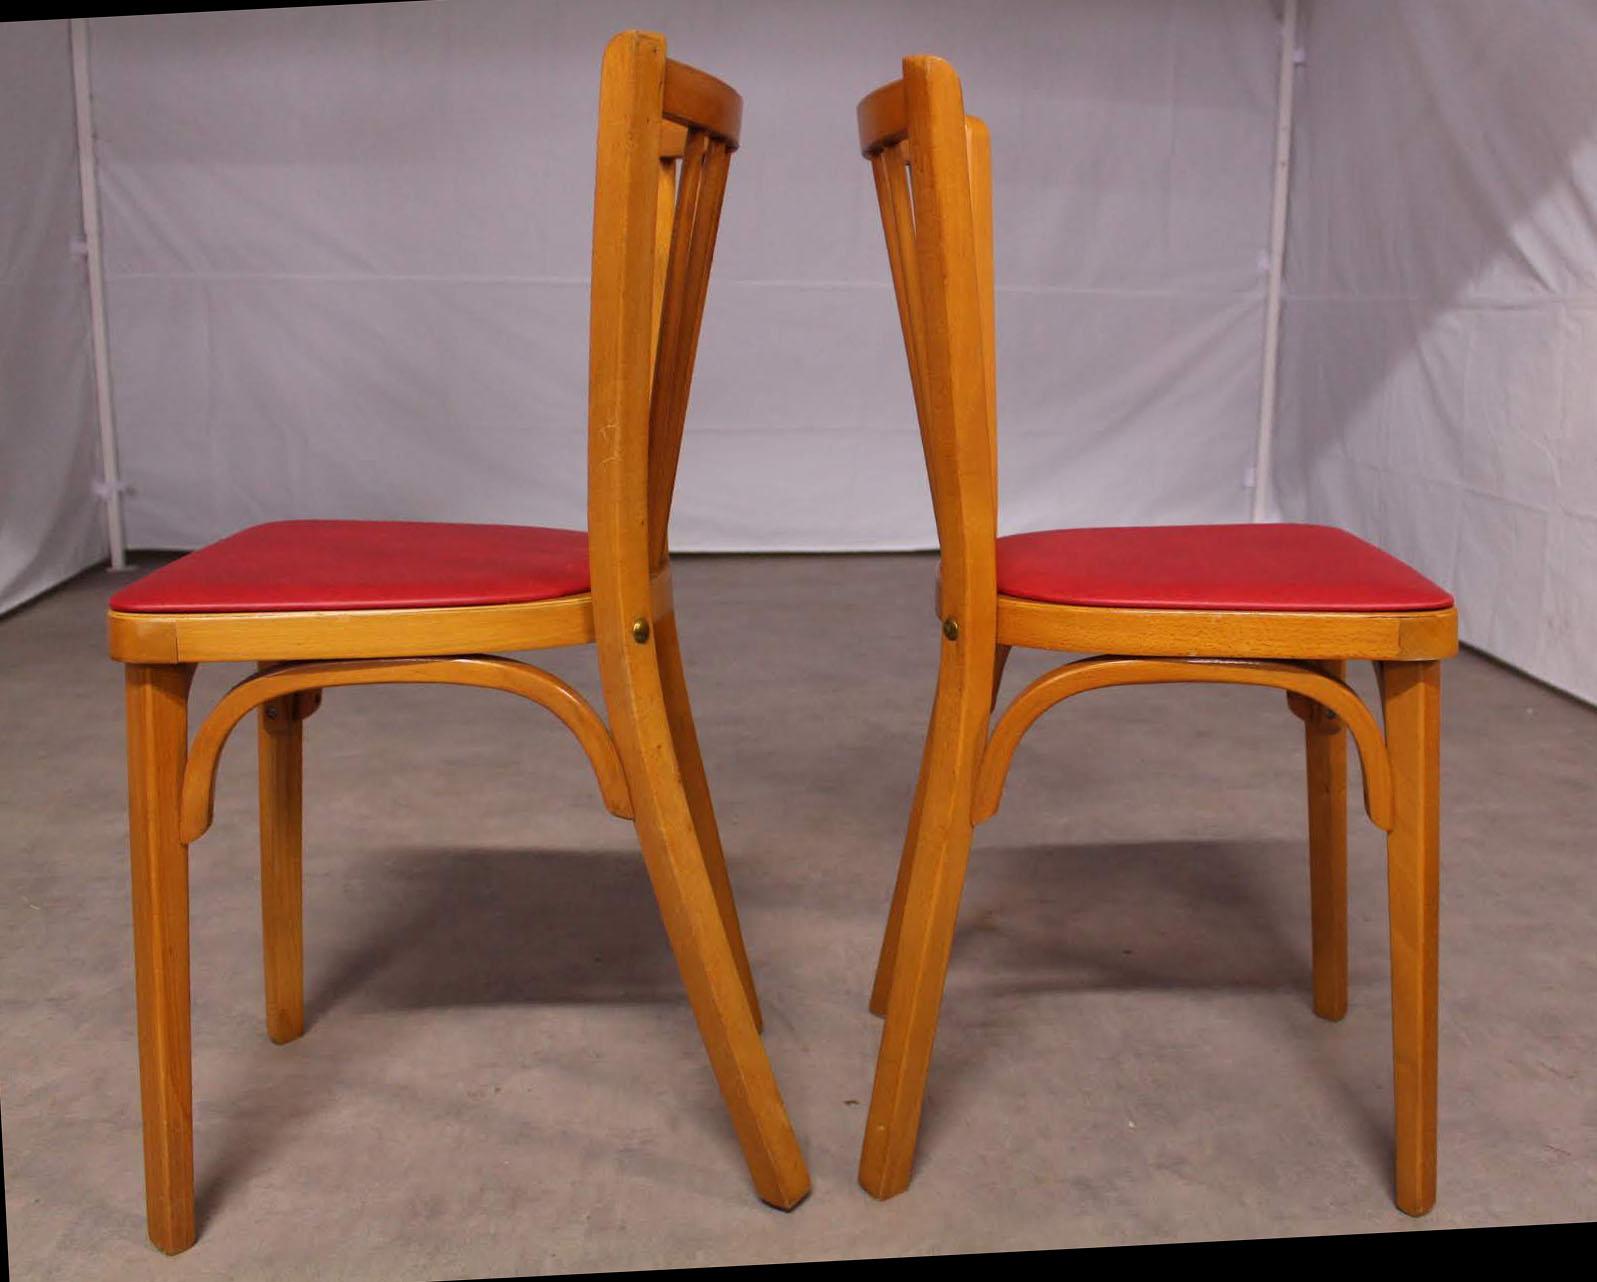 Pair of midcentury French Bistro dining chairs by Baumann, circa 1950
With original label still visible under one
Two side or dining chairs
Original vintage condition 
Frames are sound and solid.
Classic Beech bistro chairs made in France by